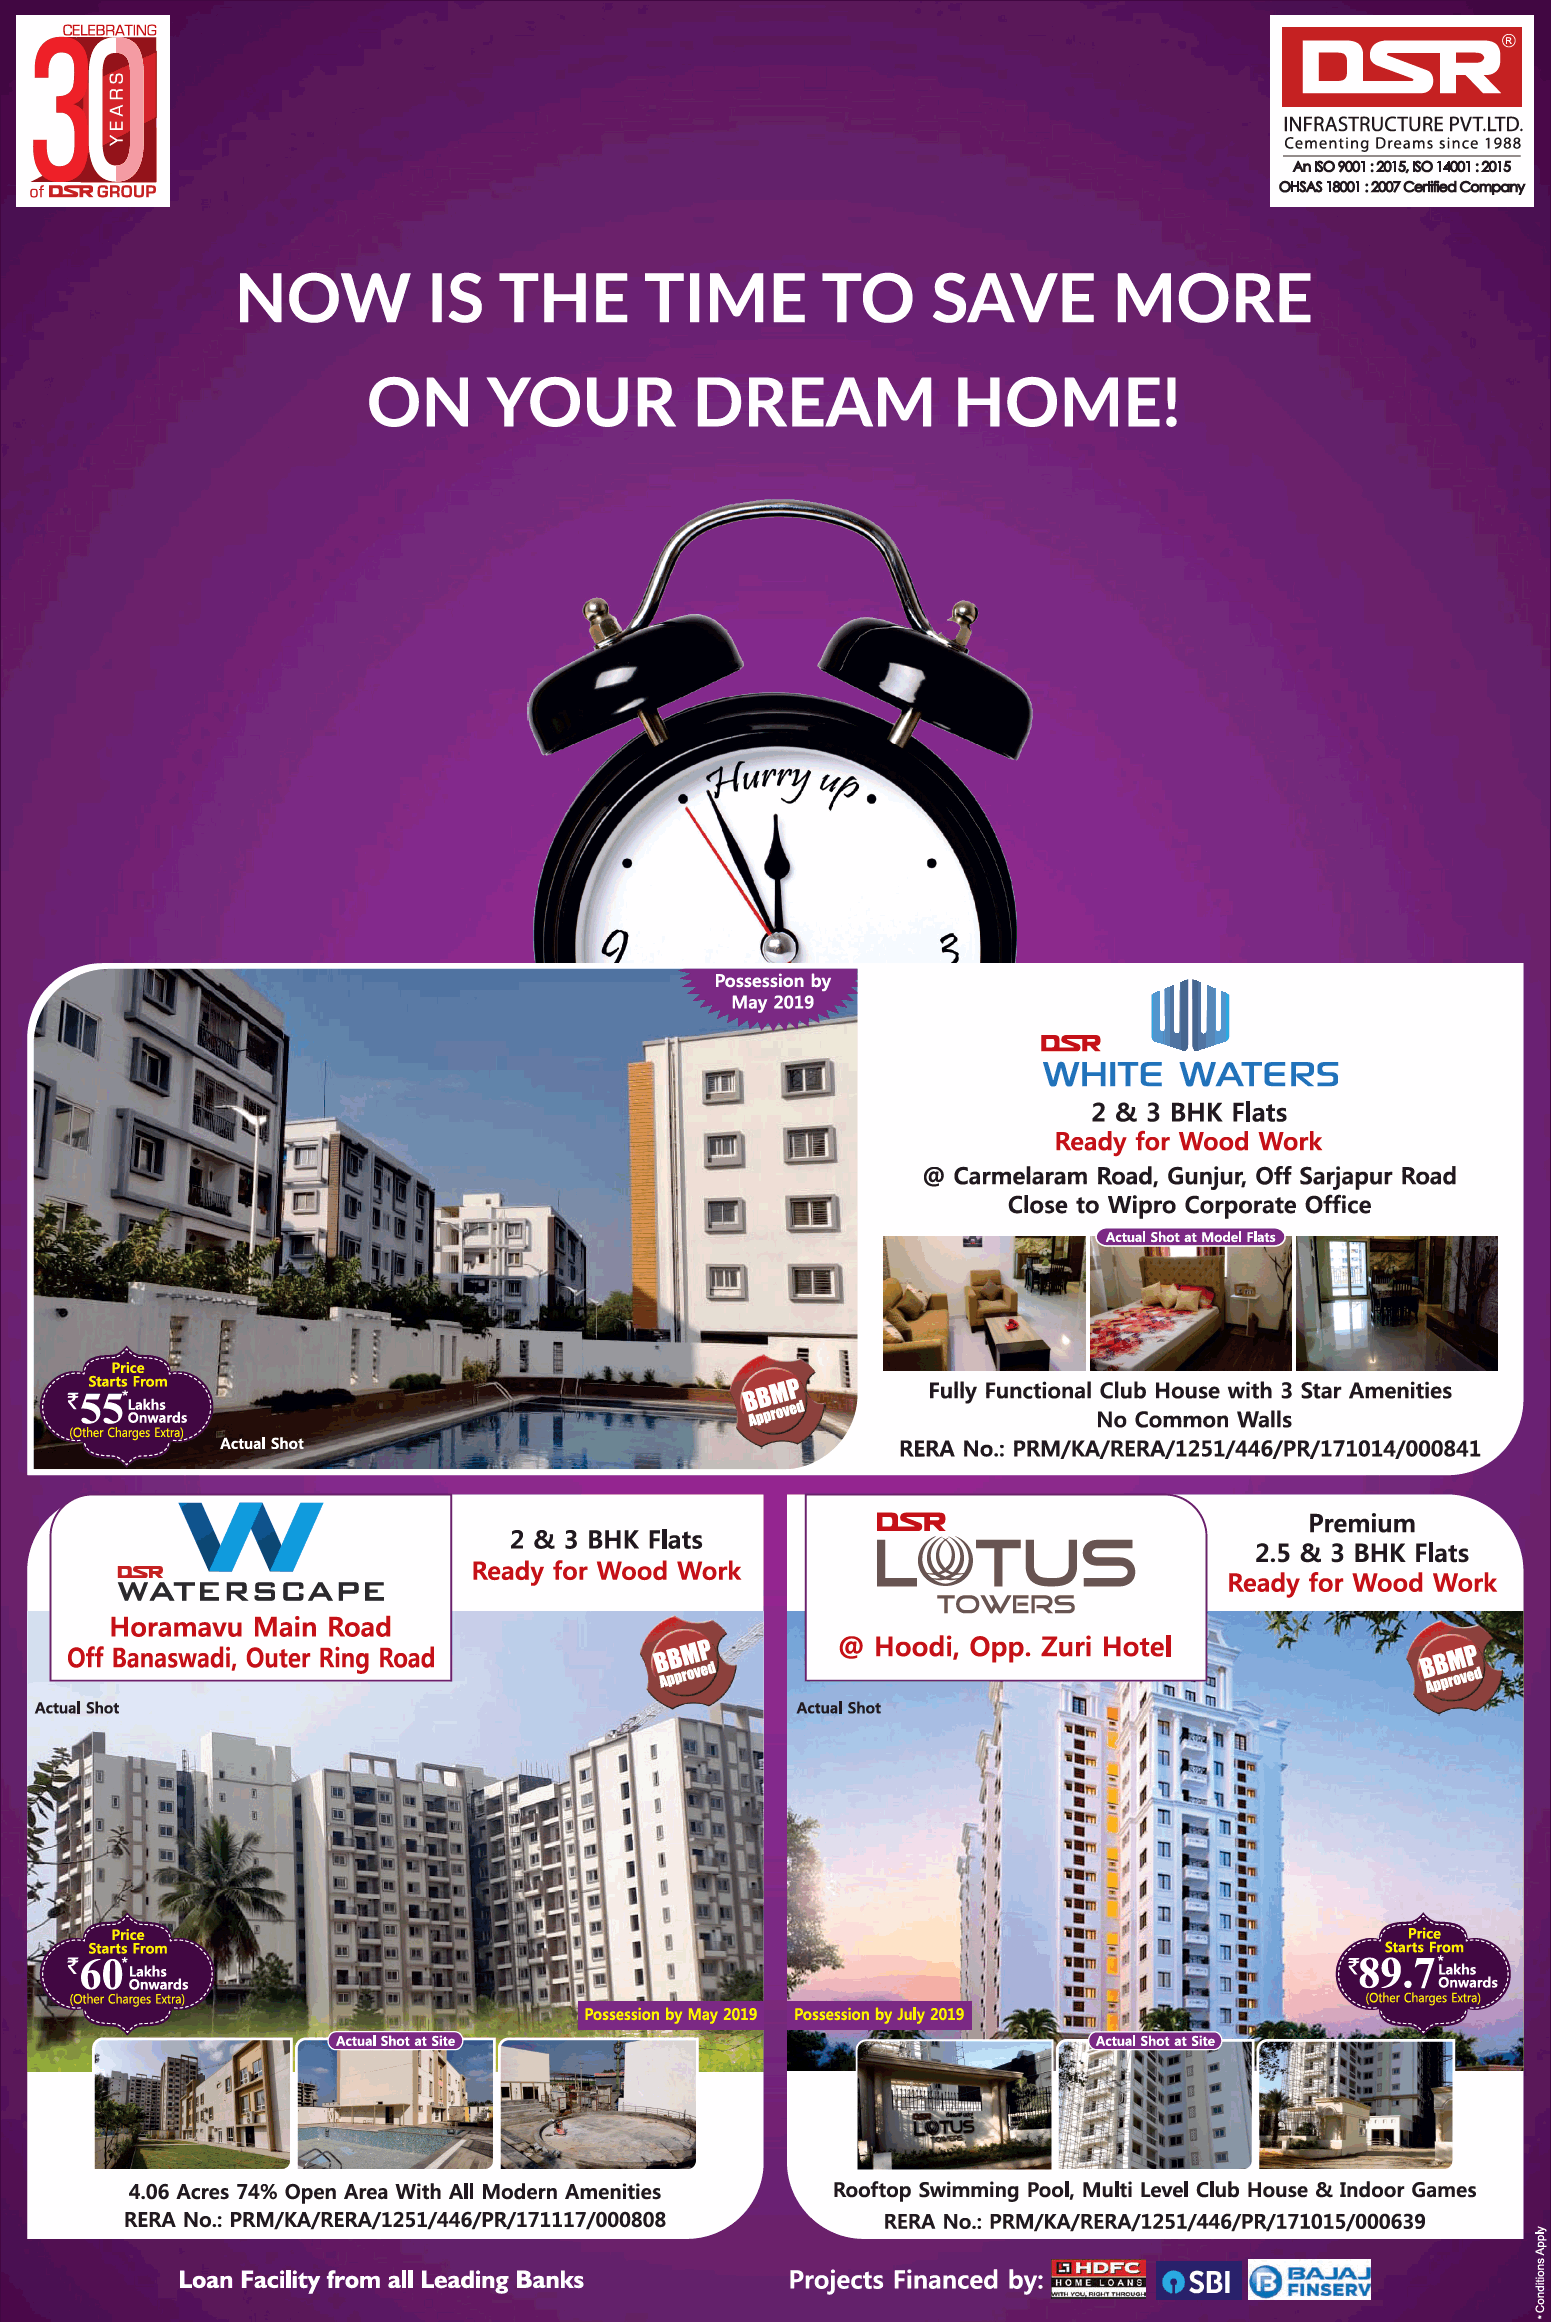 Invest at DSR Projects in Bangalore